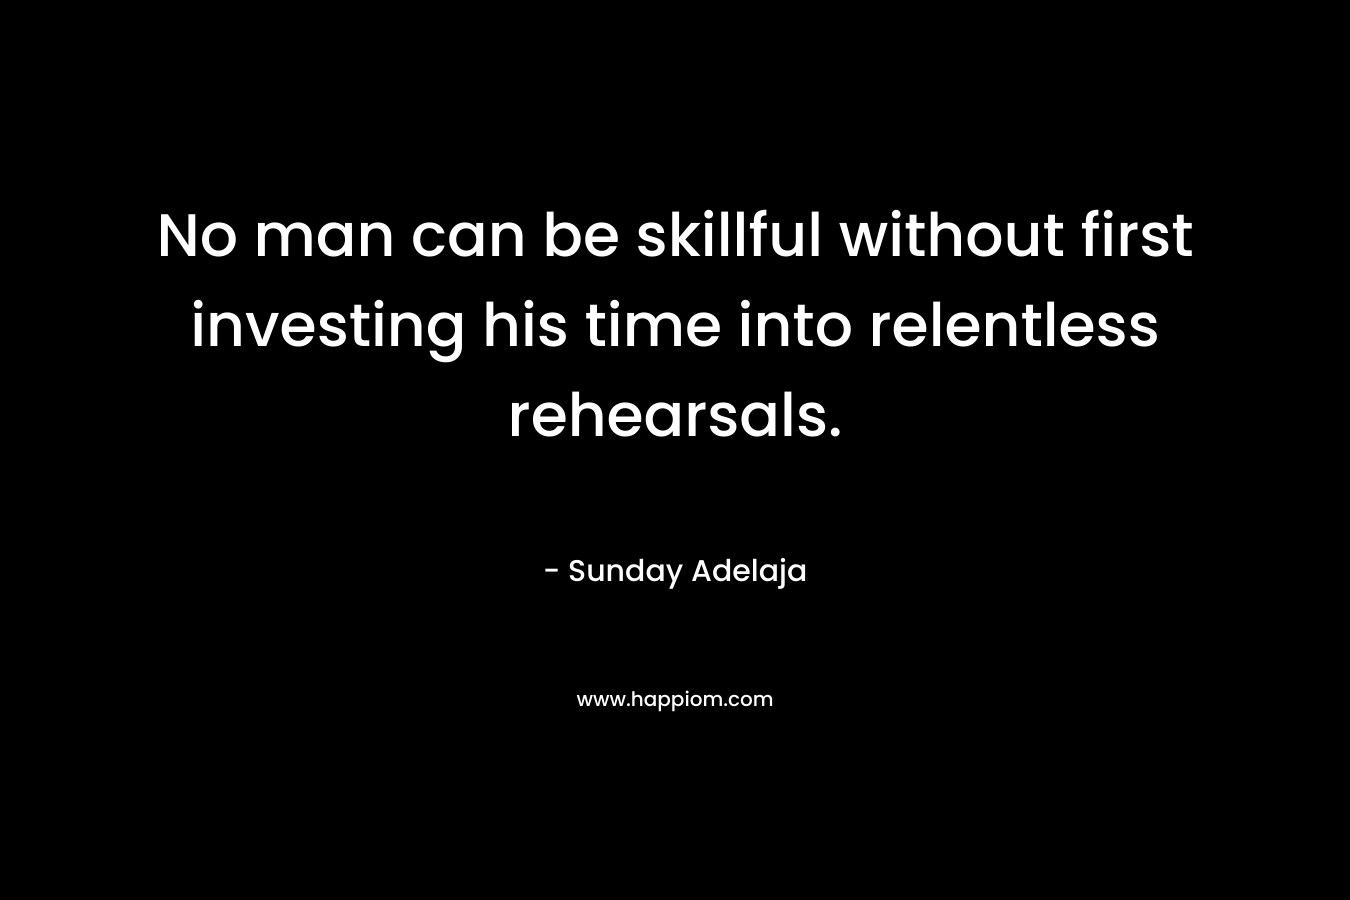 No man can be skillful without first investing his time into relentless rehearsals.